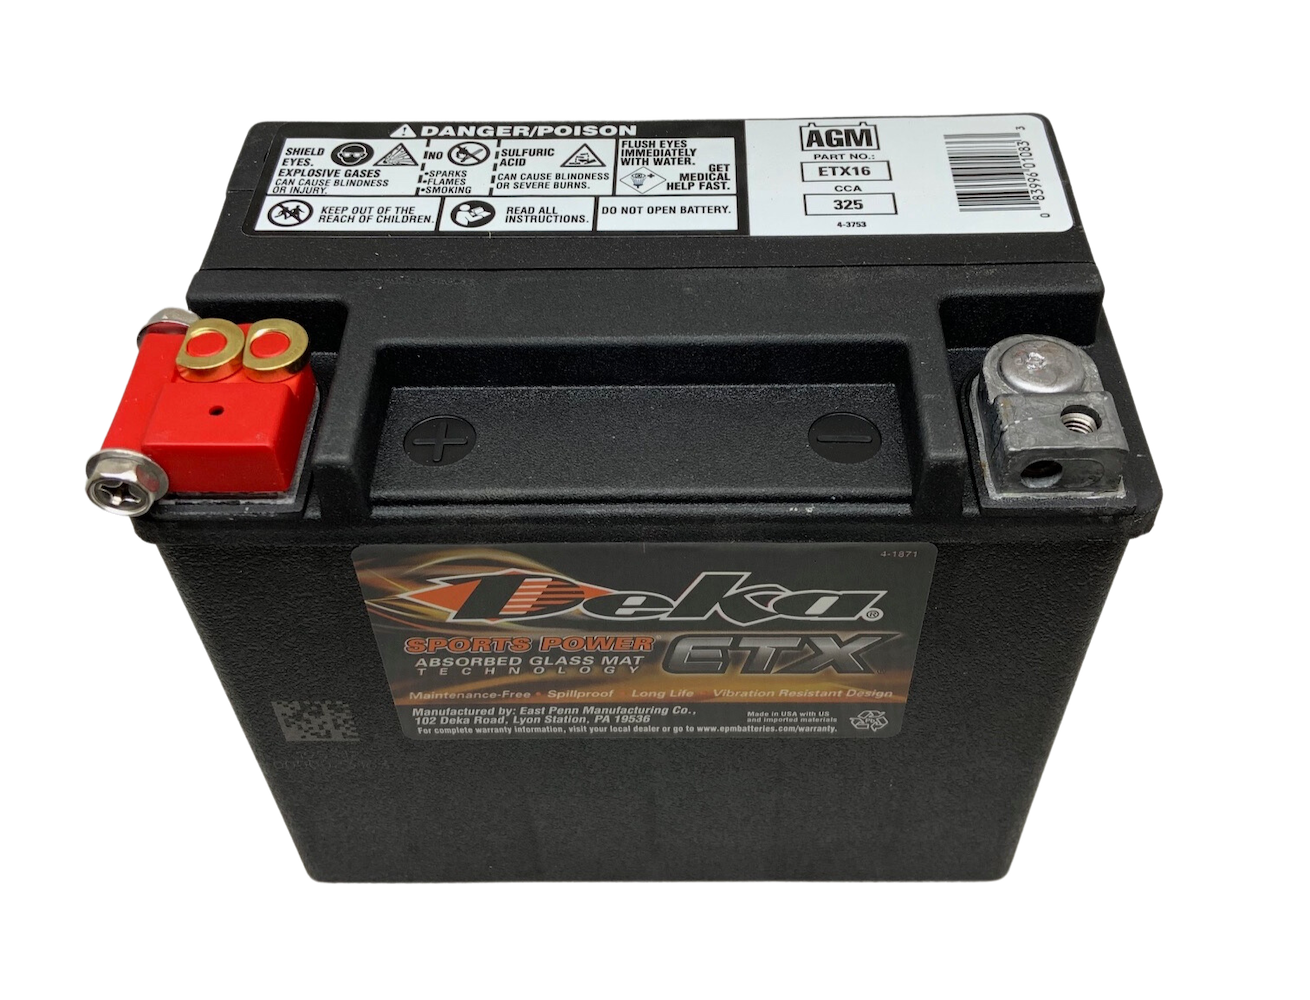 Does the ETX16 battery have a top or side cable connection?